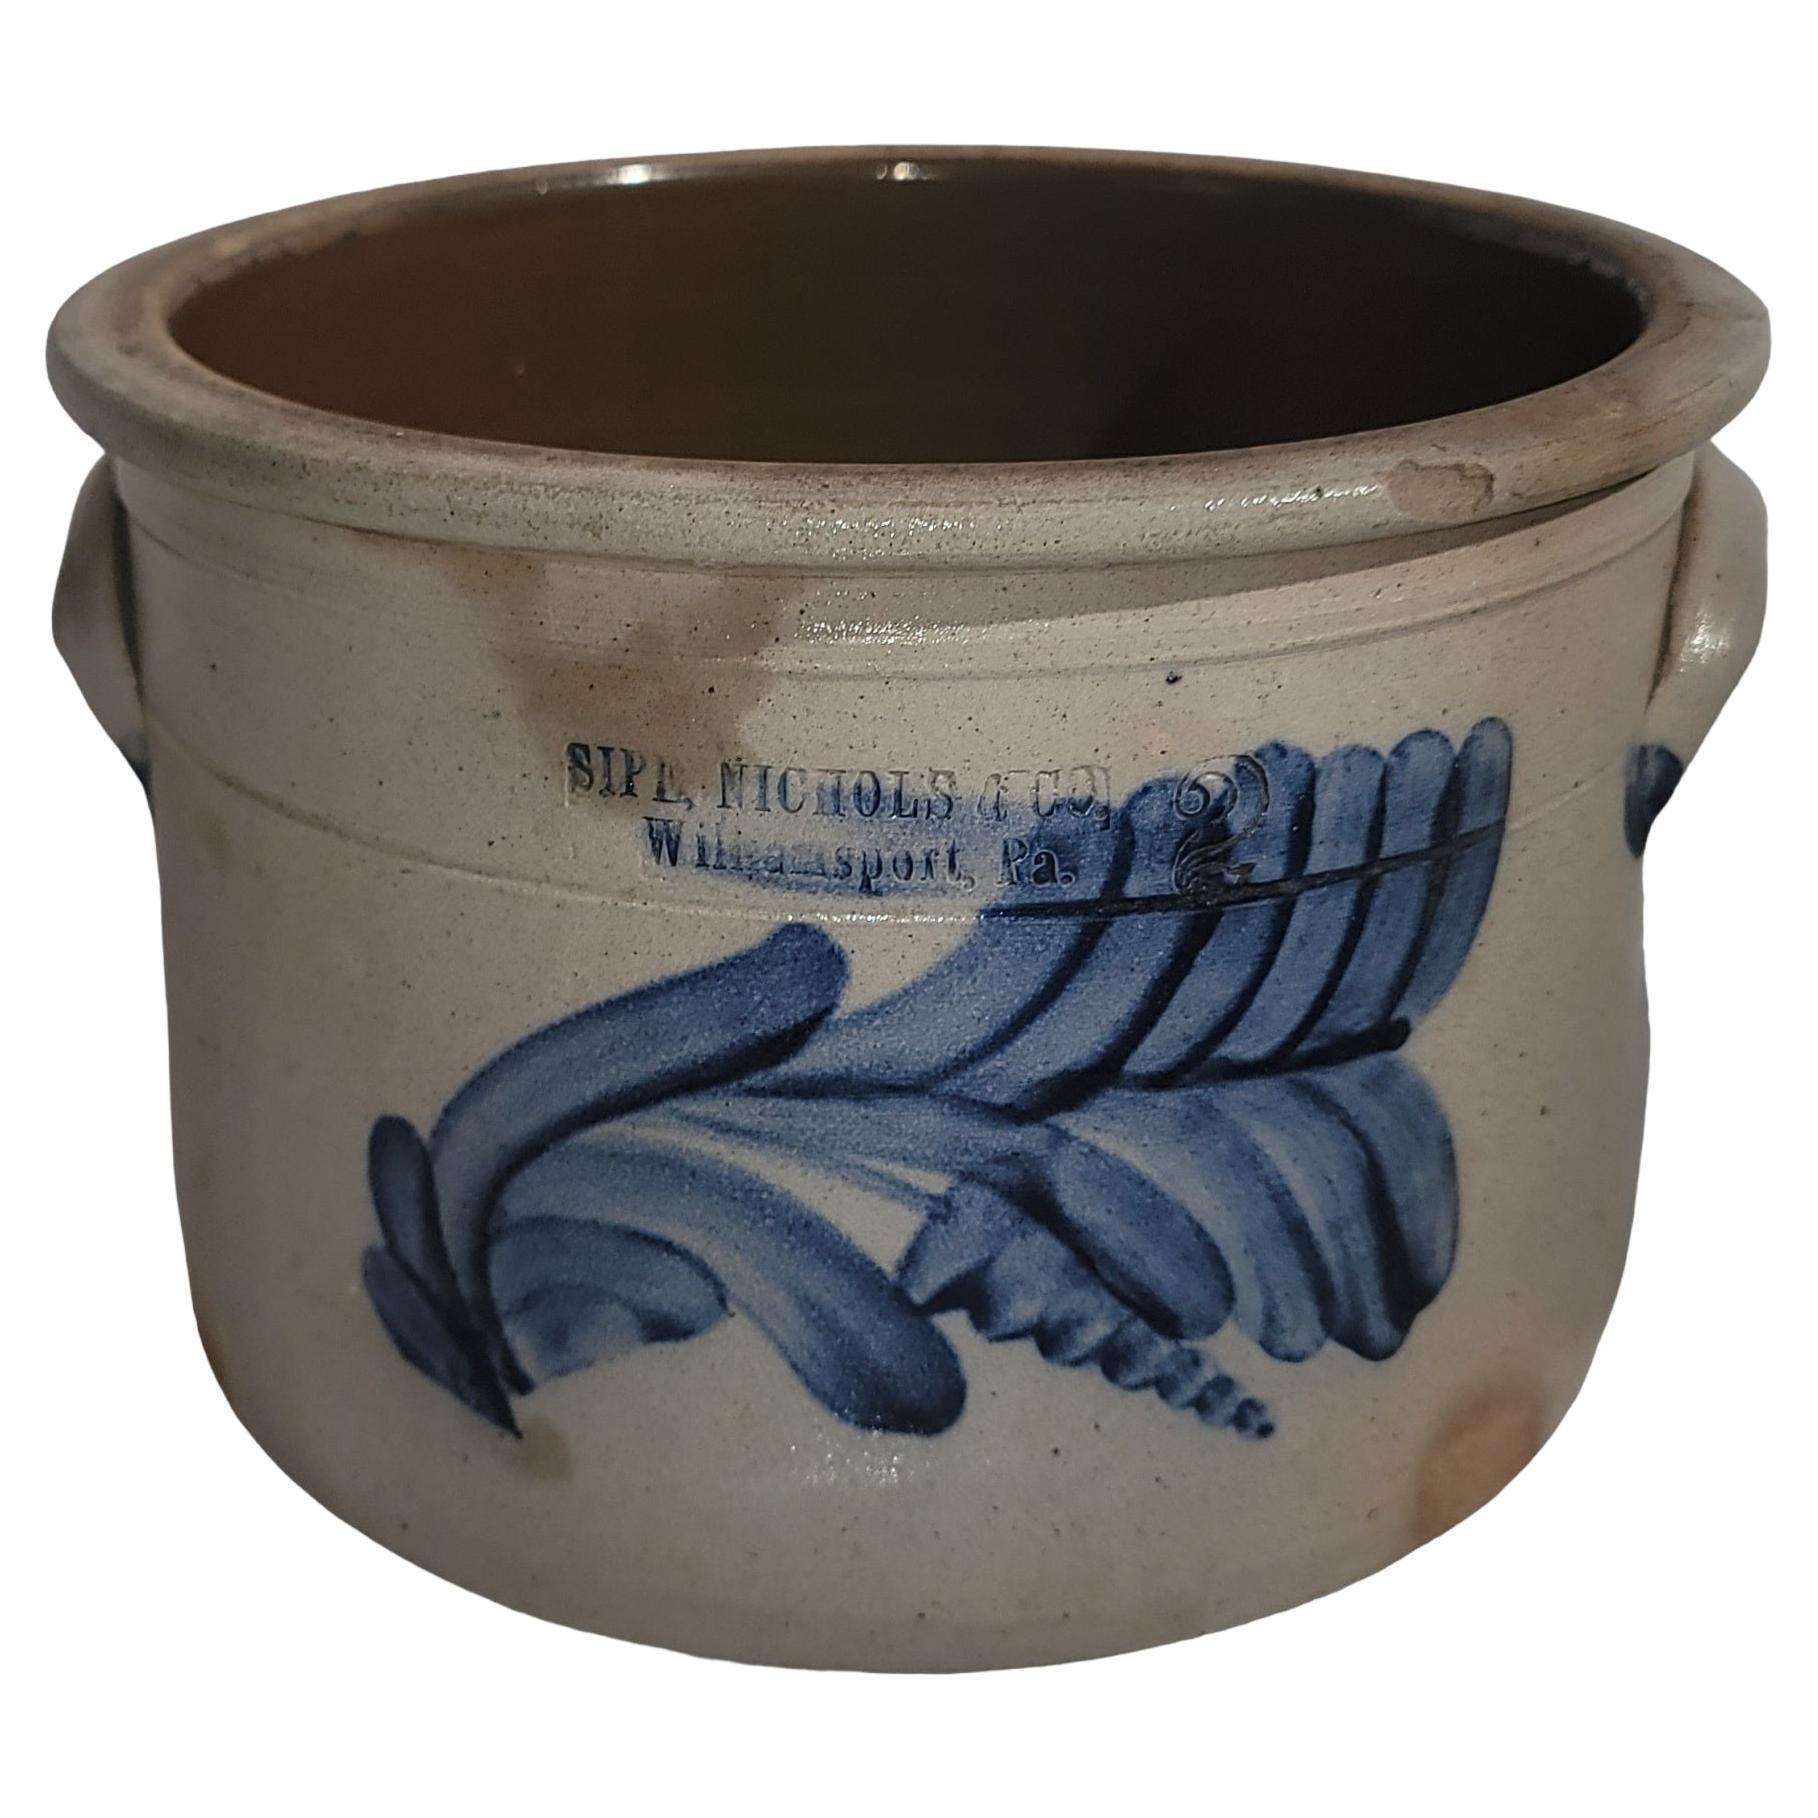 This fine Sipe & Nichols decorated stoneware cake crock has amazing hand painted blue decoration and in very good condition.Minor rim chip as you can see in the close up photo.This is stamped Williamsport,Pennsylvania and stamp 